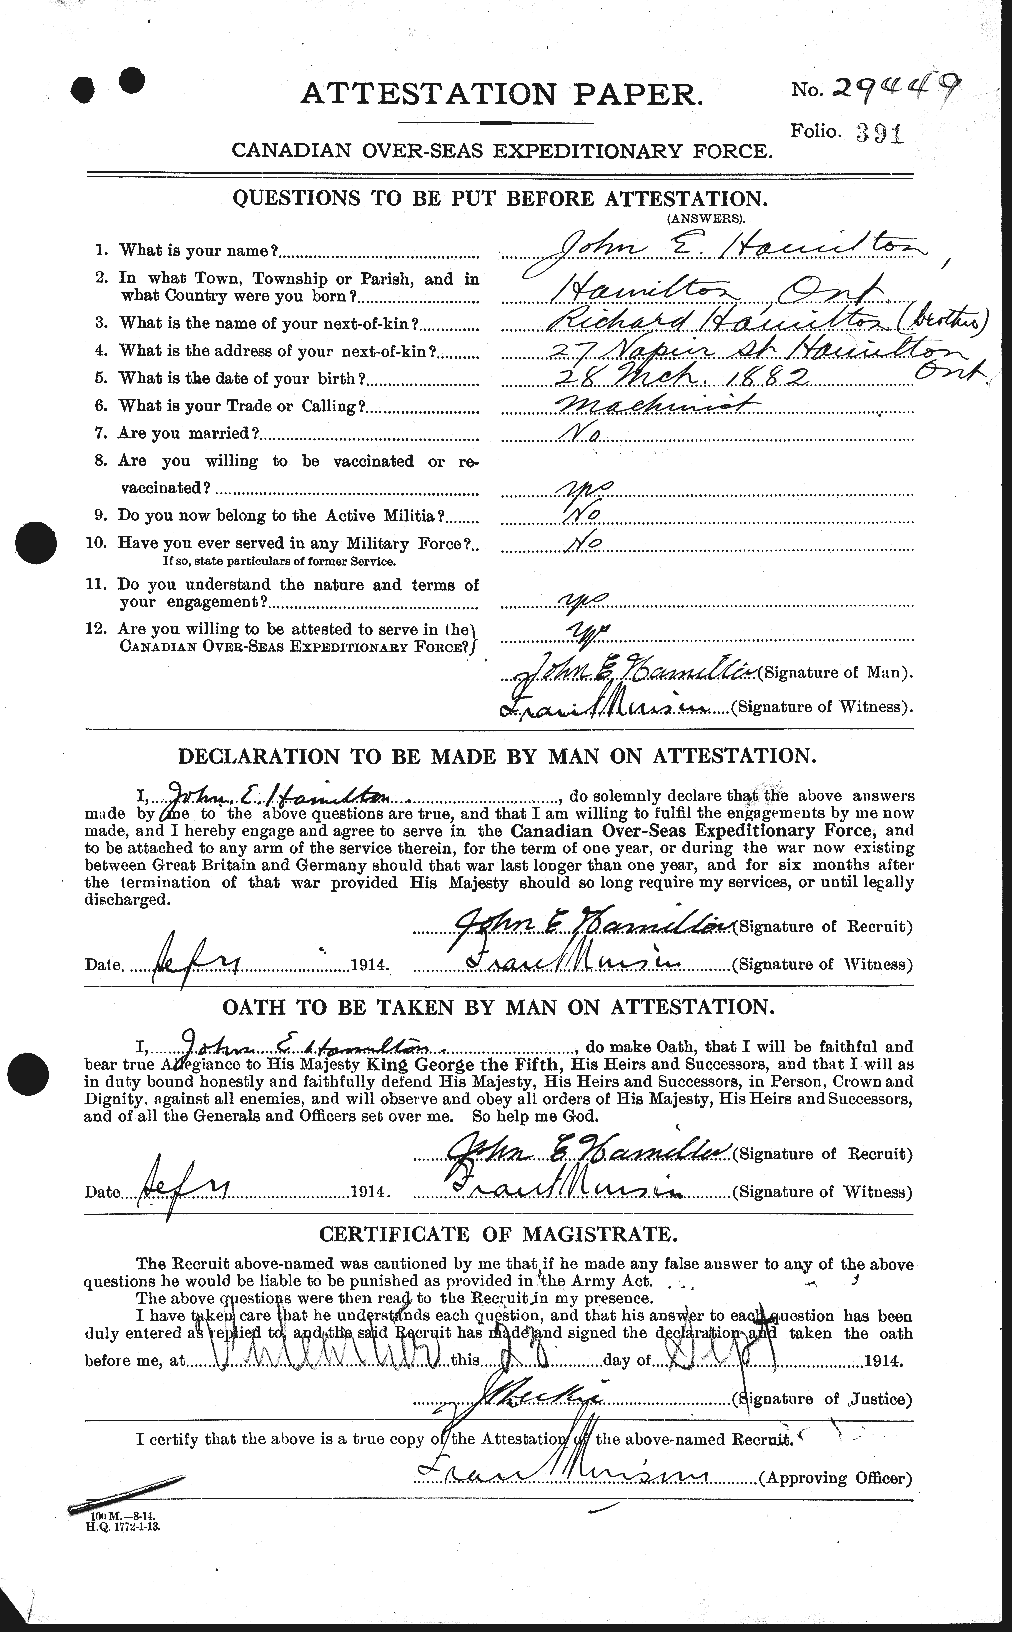 Personnel Records of the First World War - CEF 373078a